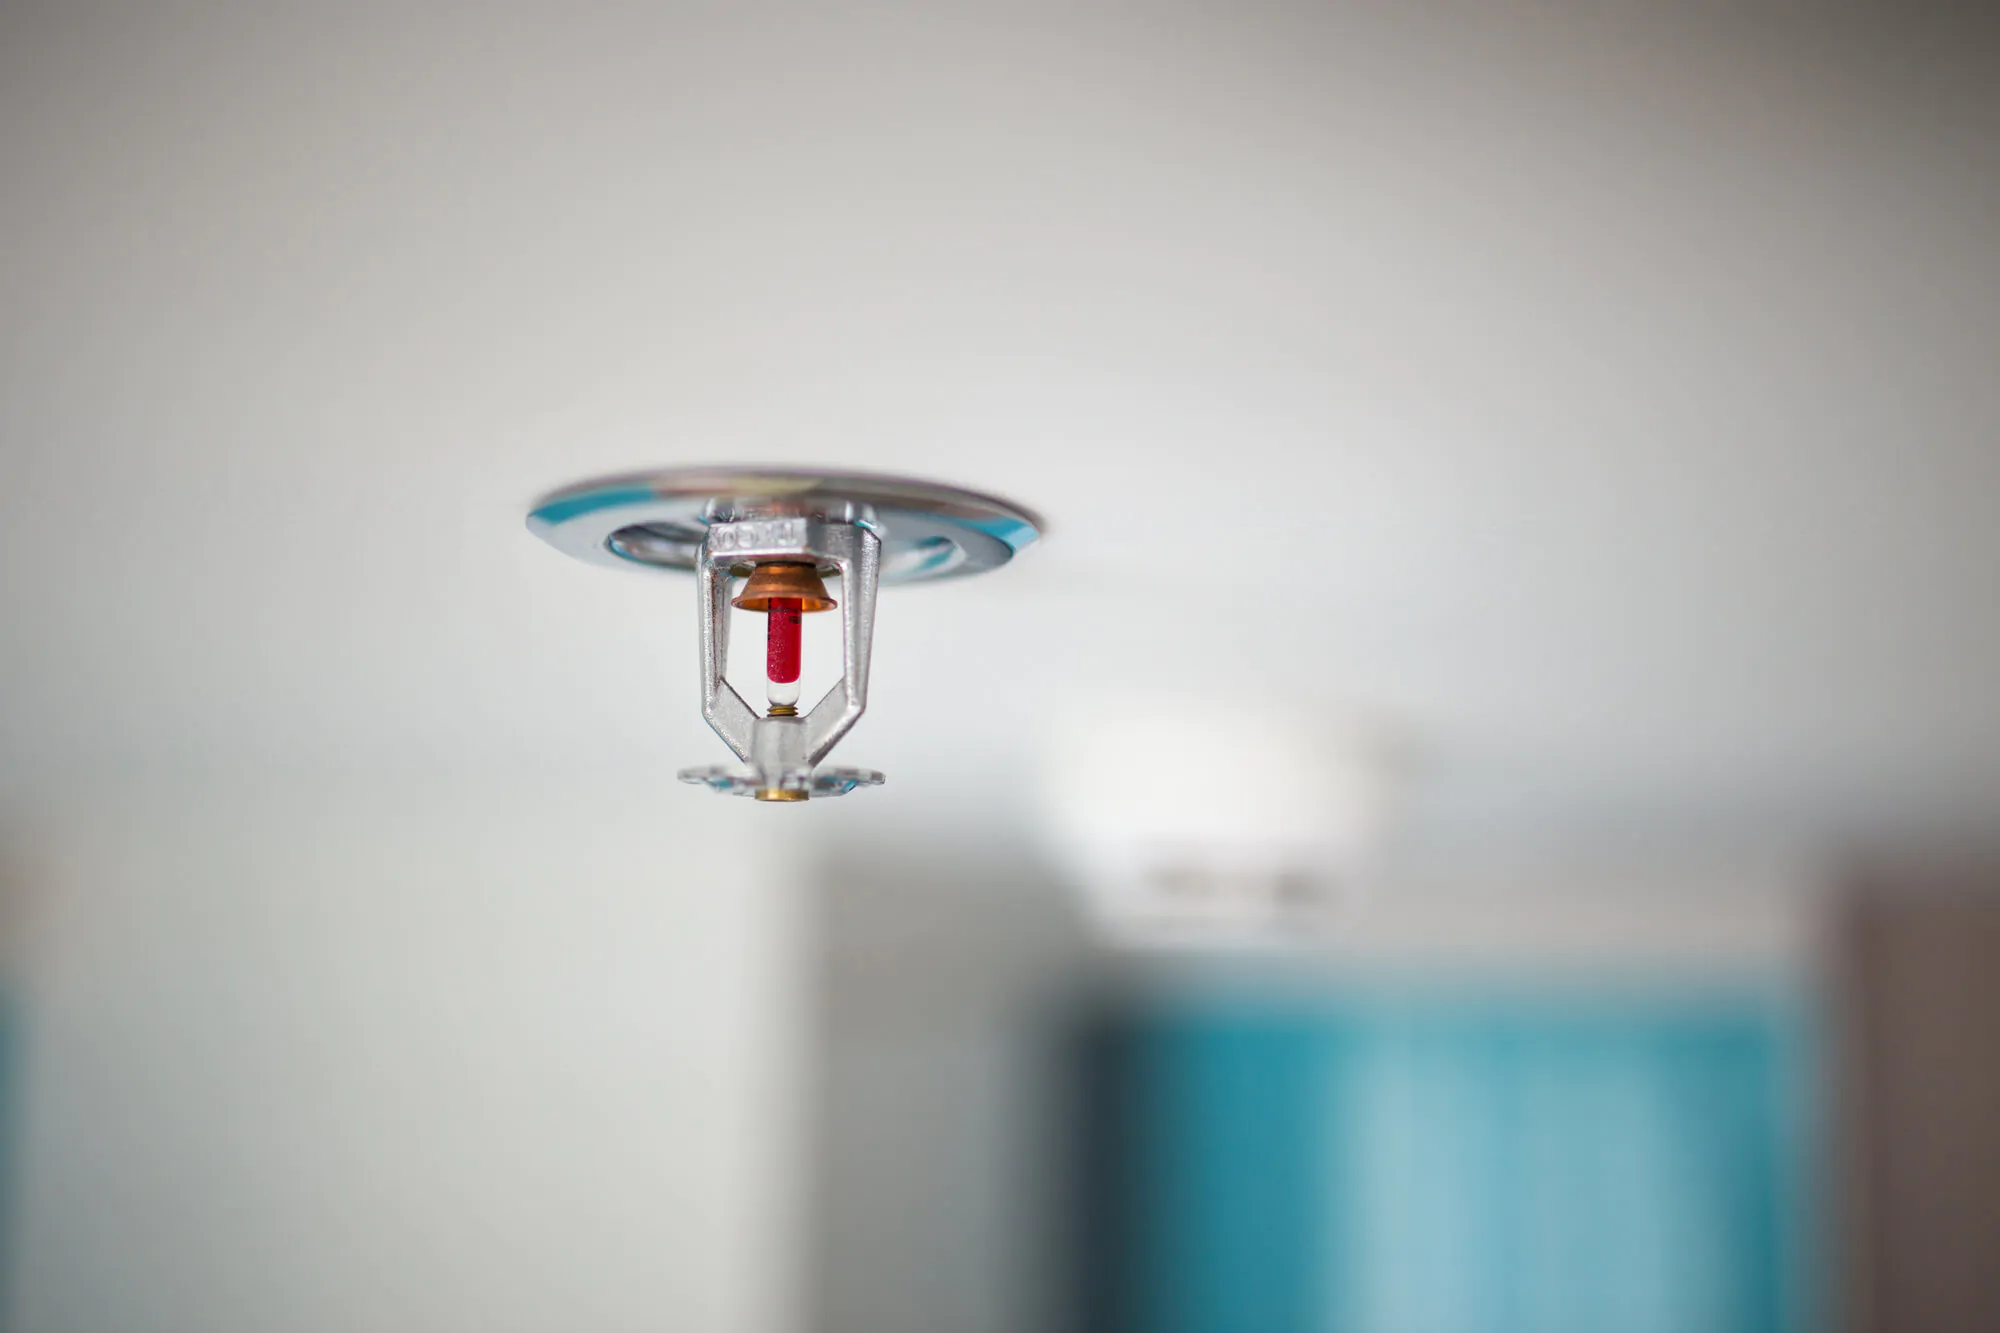 Debunking Common Myths About Fire Sprinkler Systems